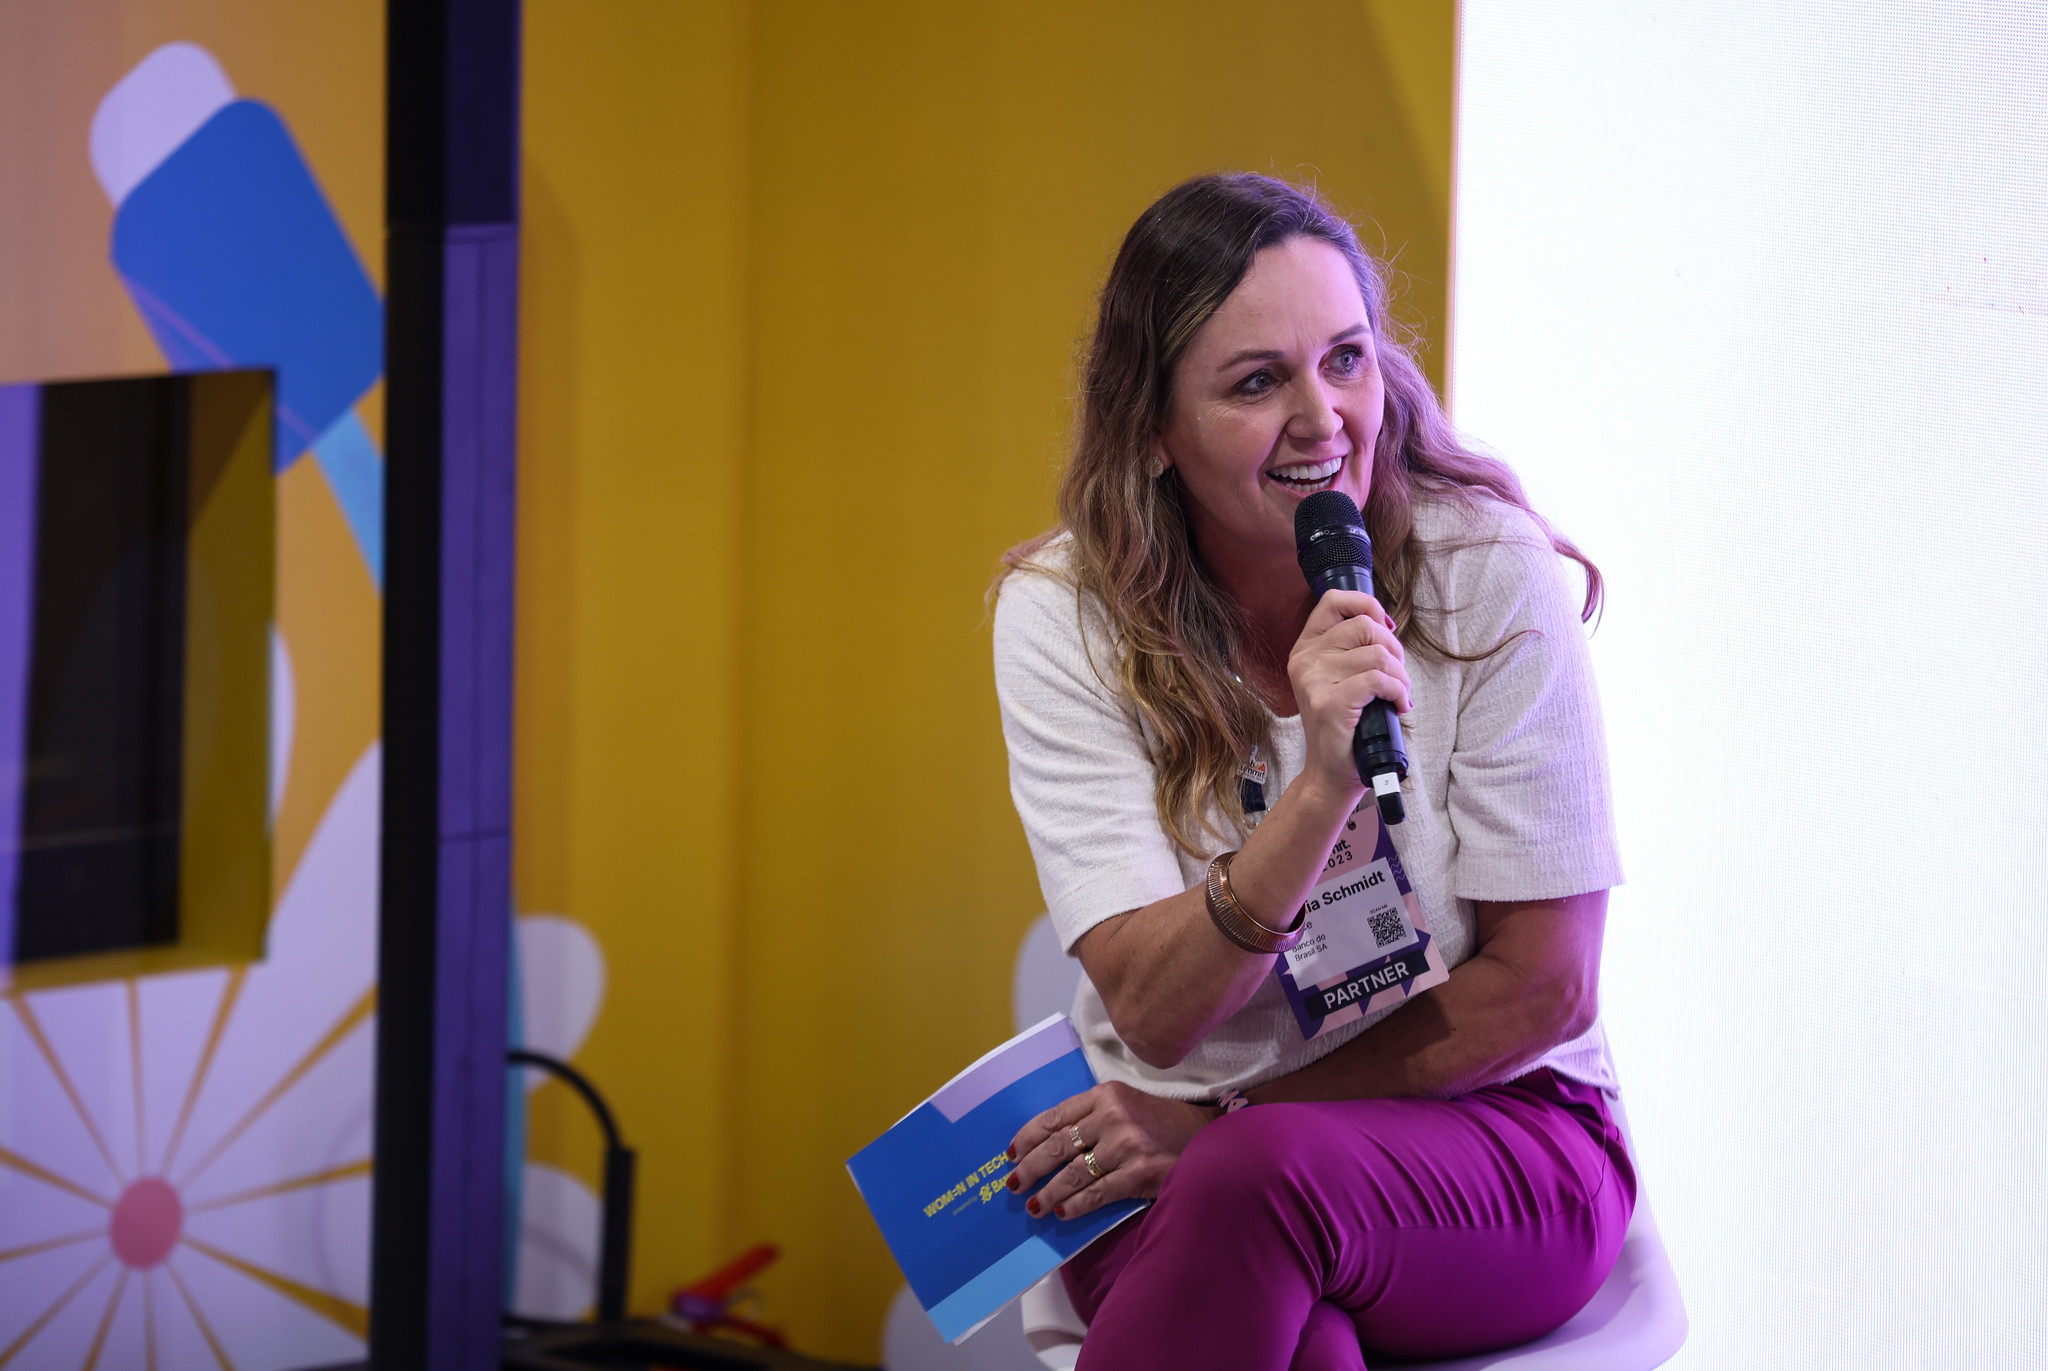 Tânia Schmidt Vince, Executive manager, Banco do Brasil SA, in Women in Tech Lounge during day one of Web Summit Rio 2023